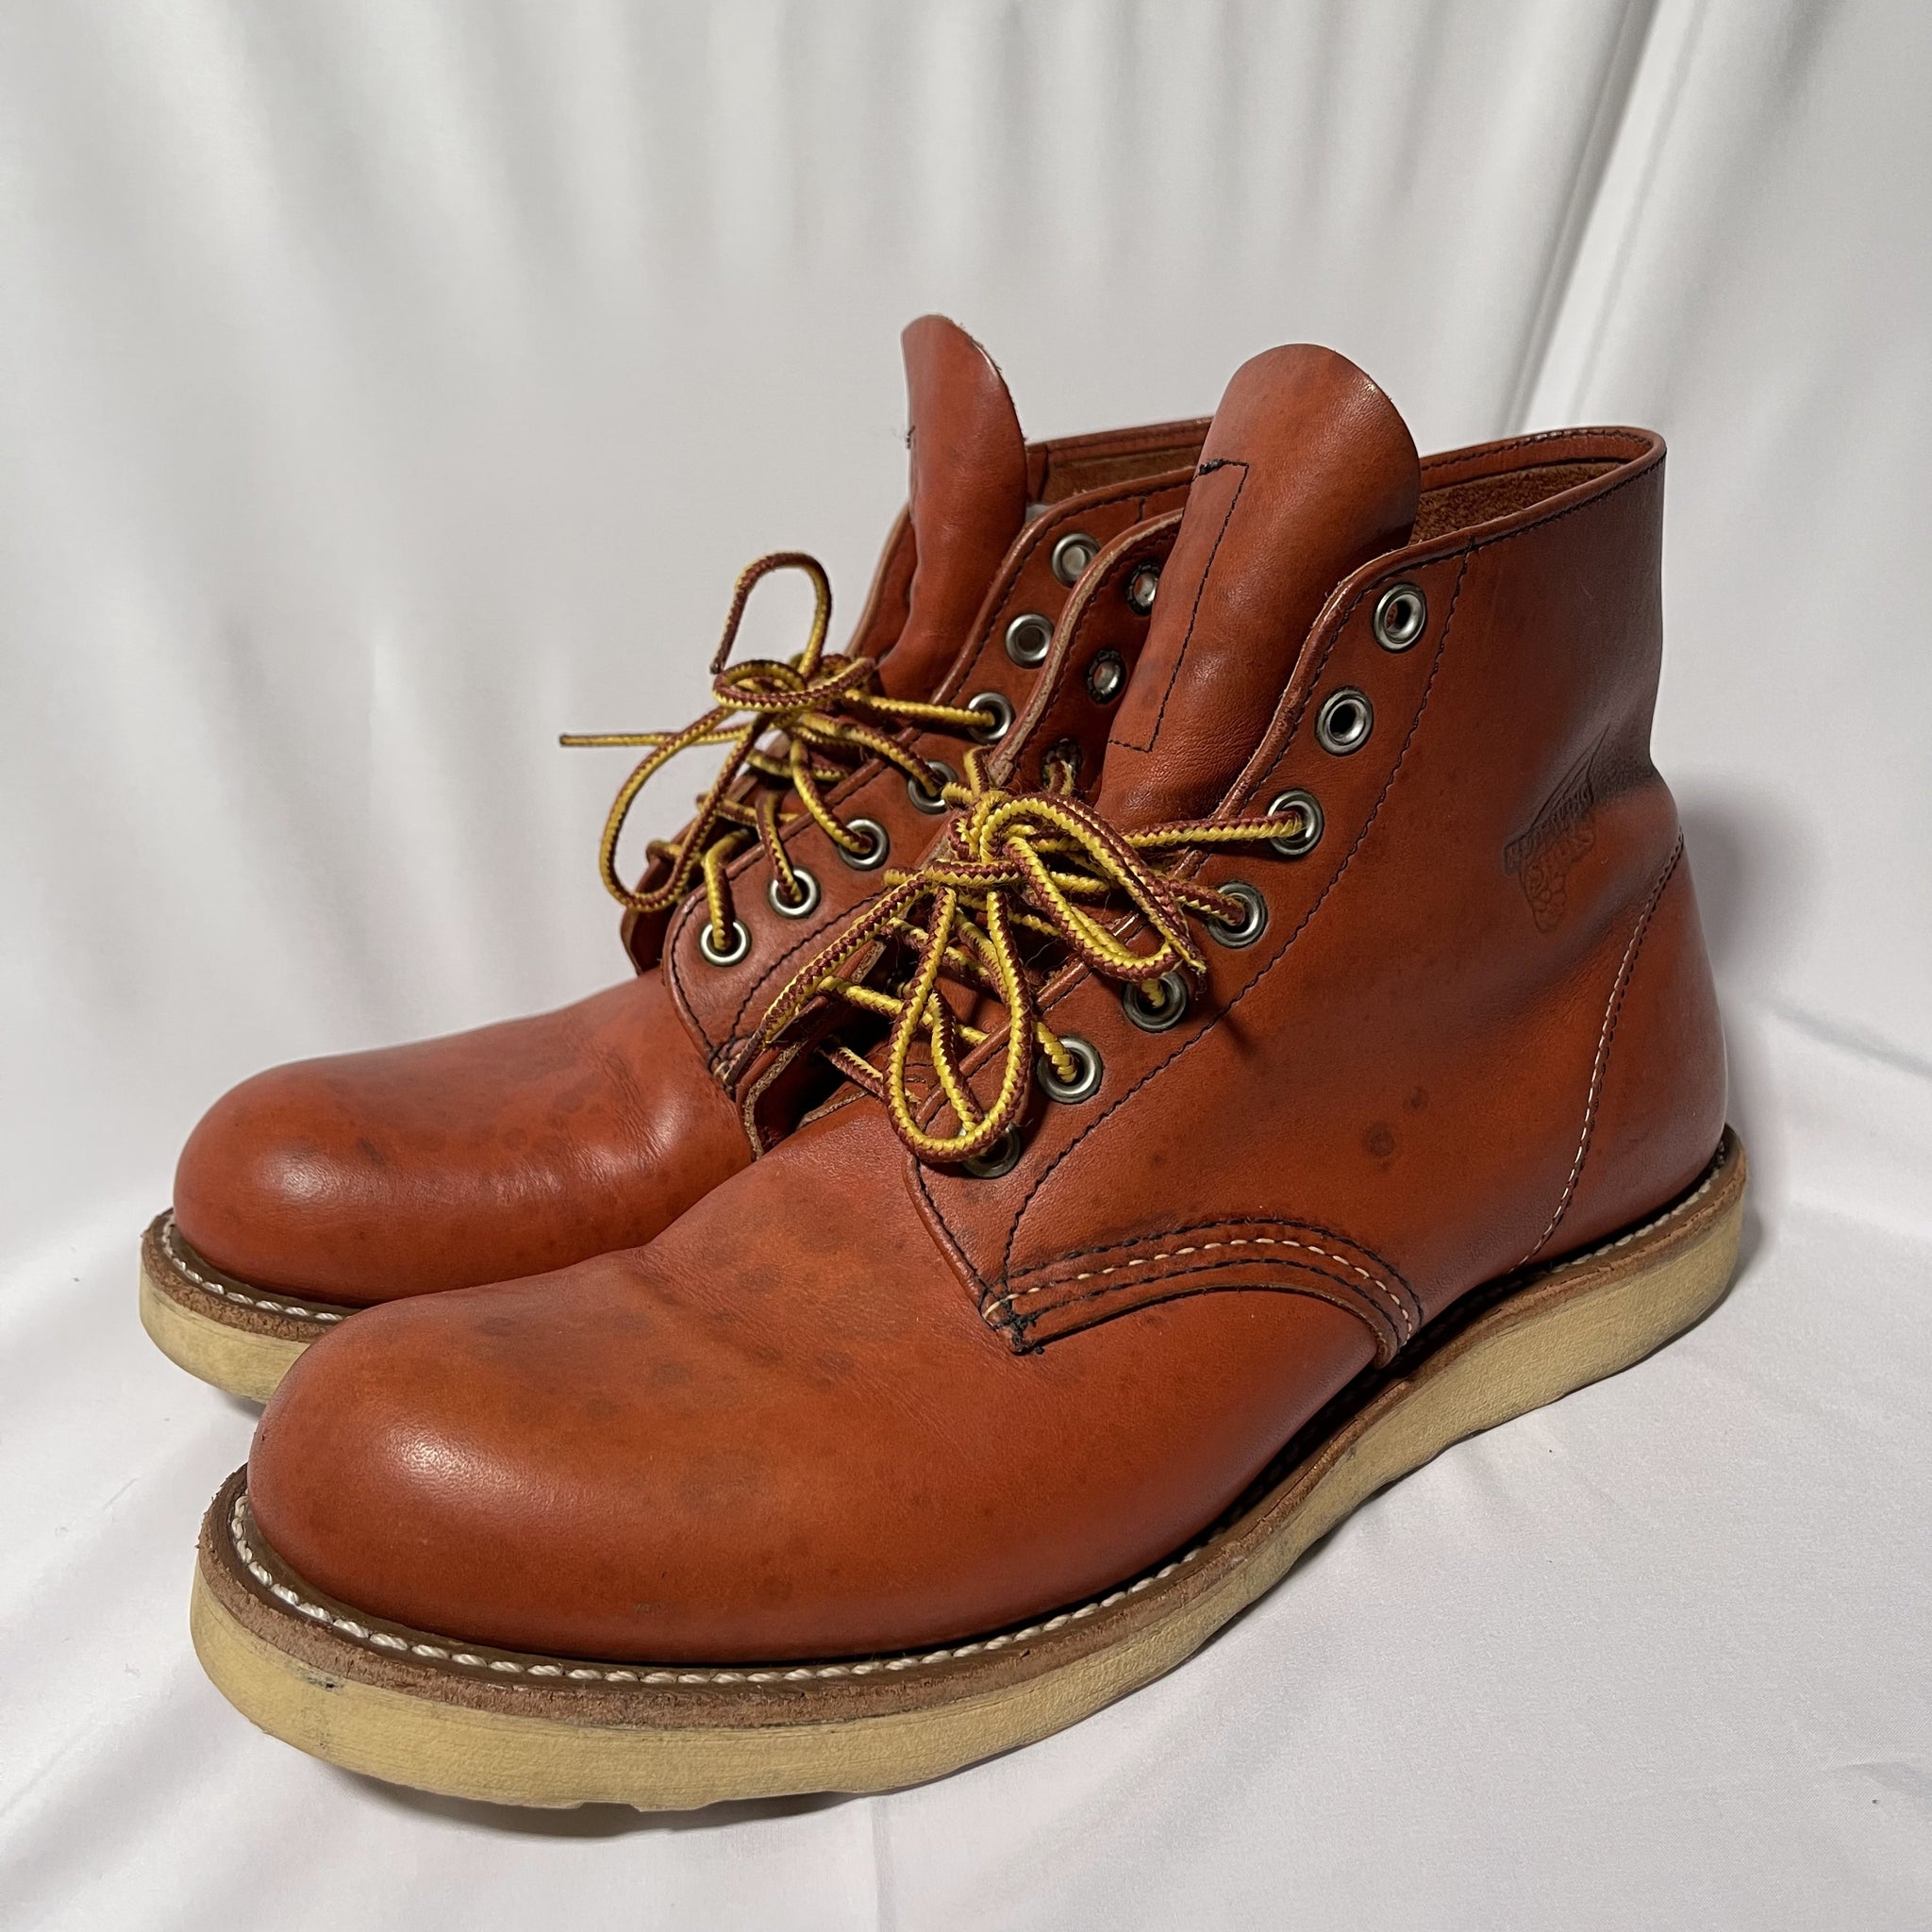 Red Wing Shoes CLASSIC ROUND STYLE NO. 8166 US 8 Eur 41.0 26.0cm